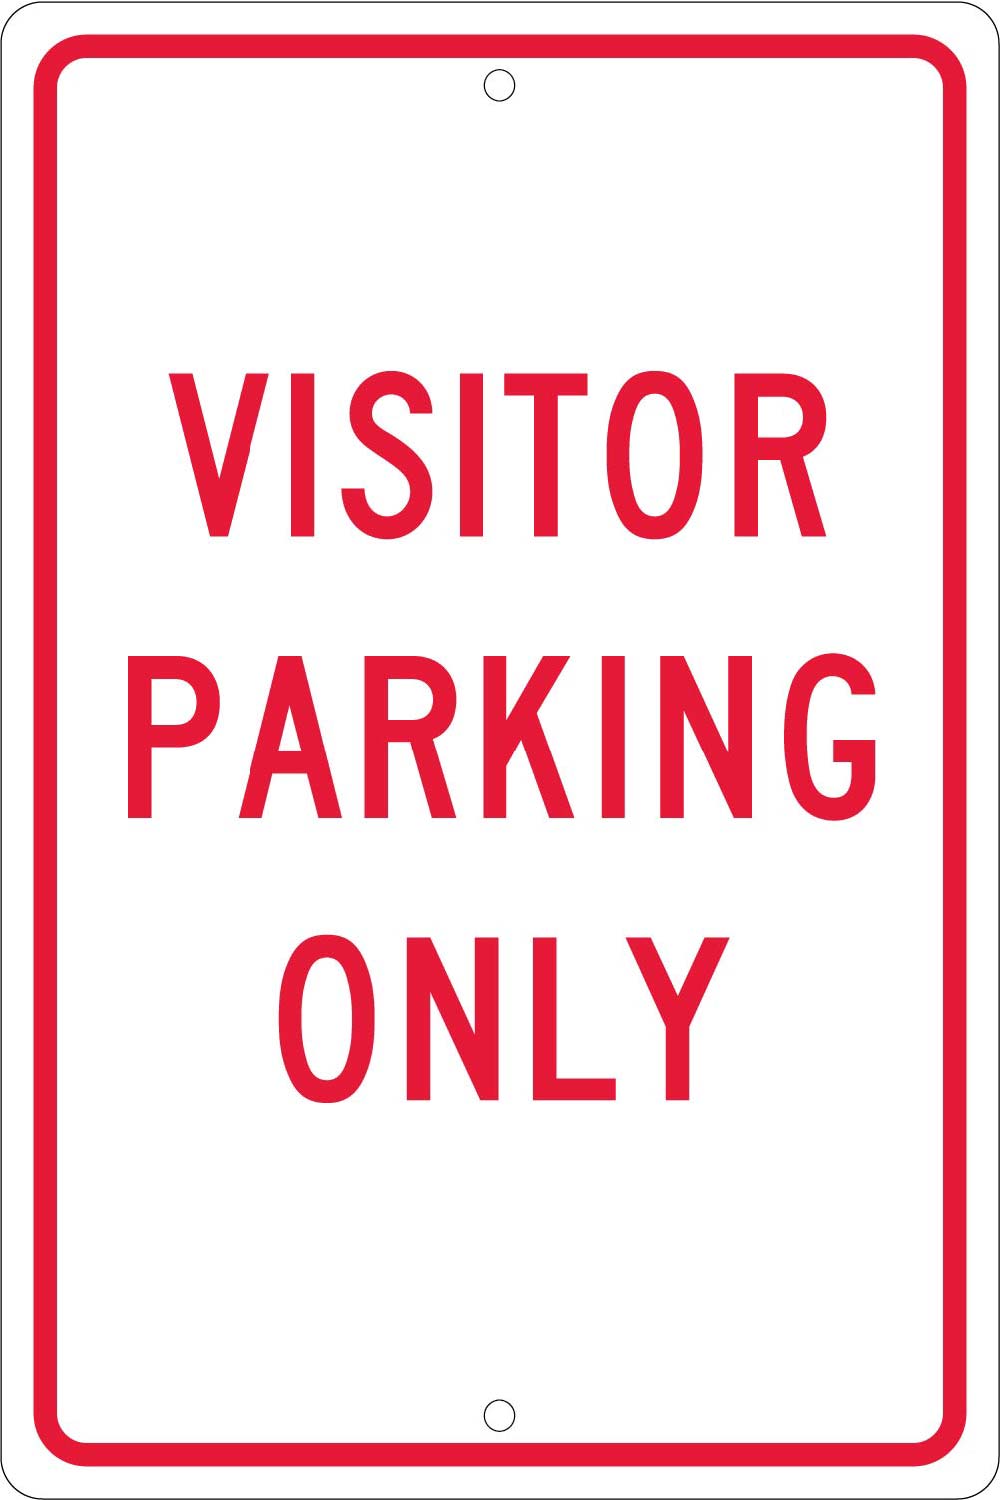 Visitor Parking Only Sign-eSafety Supplies, Inc